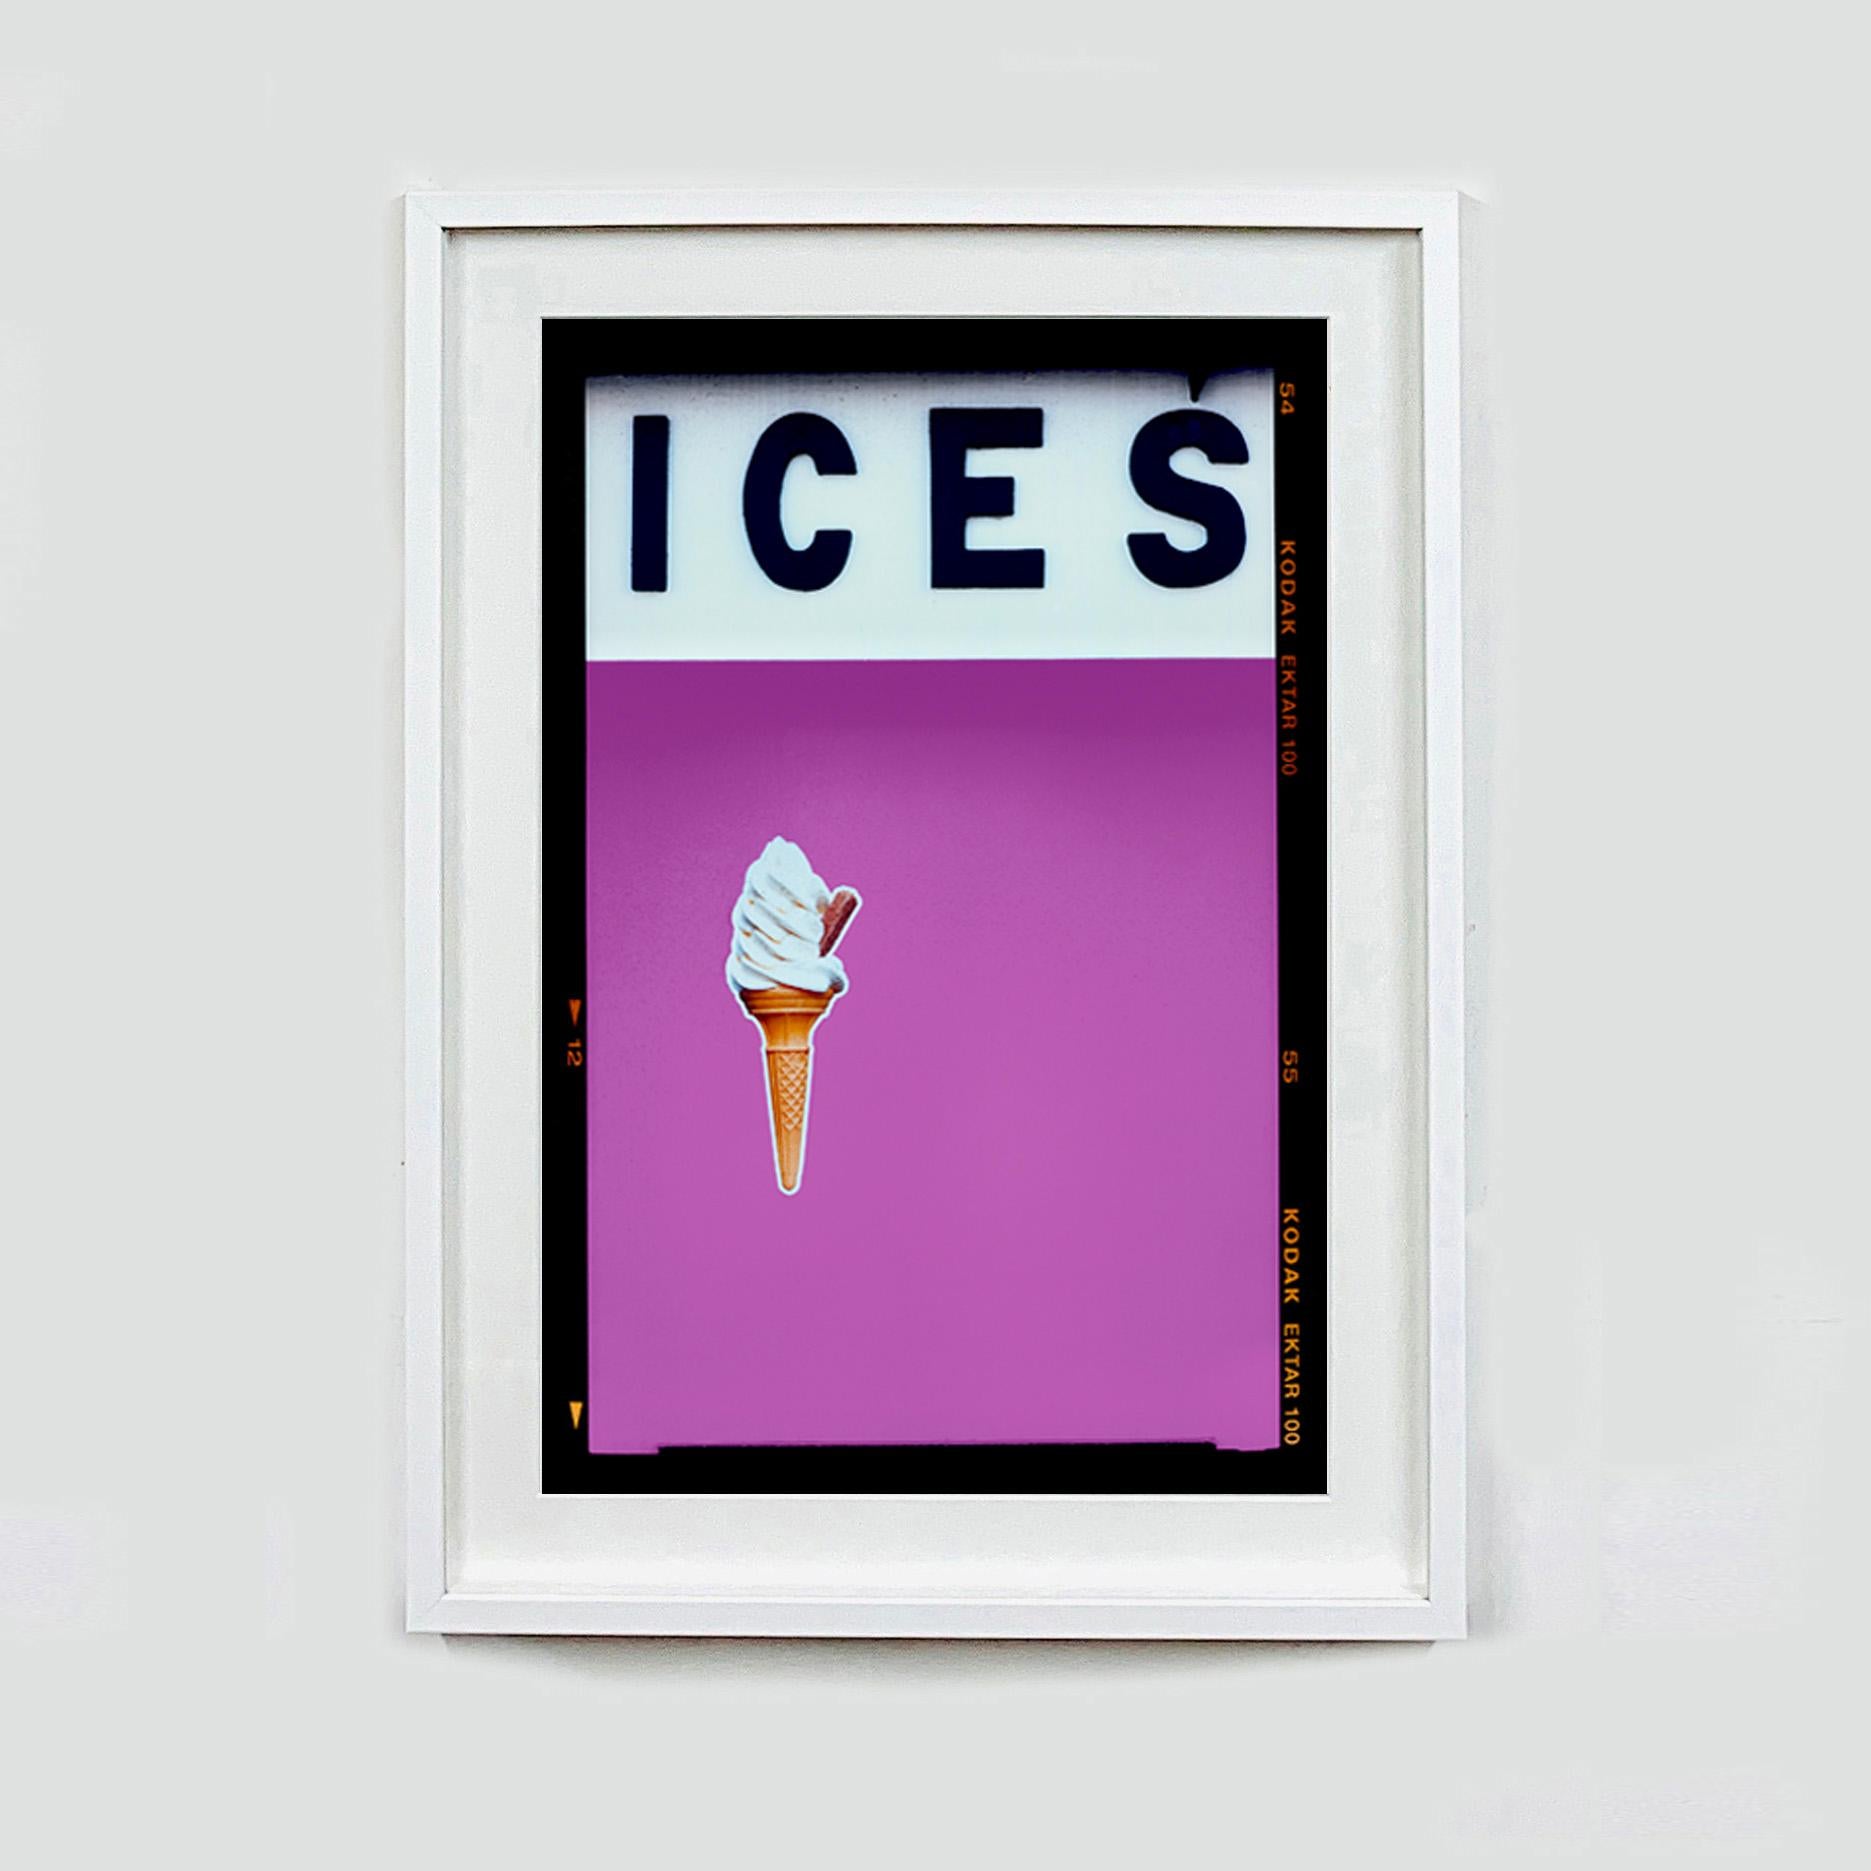 Ices (Plum), Bexhill-on-Sea - British seaside color photography - Contemporary Photograph by Richard Heeps